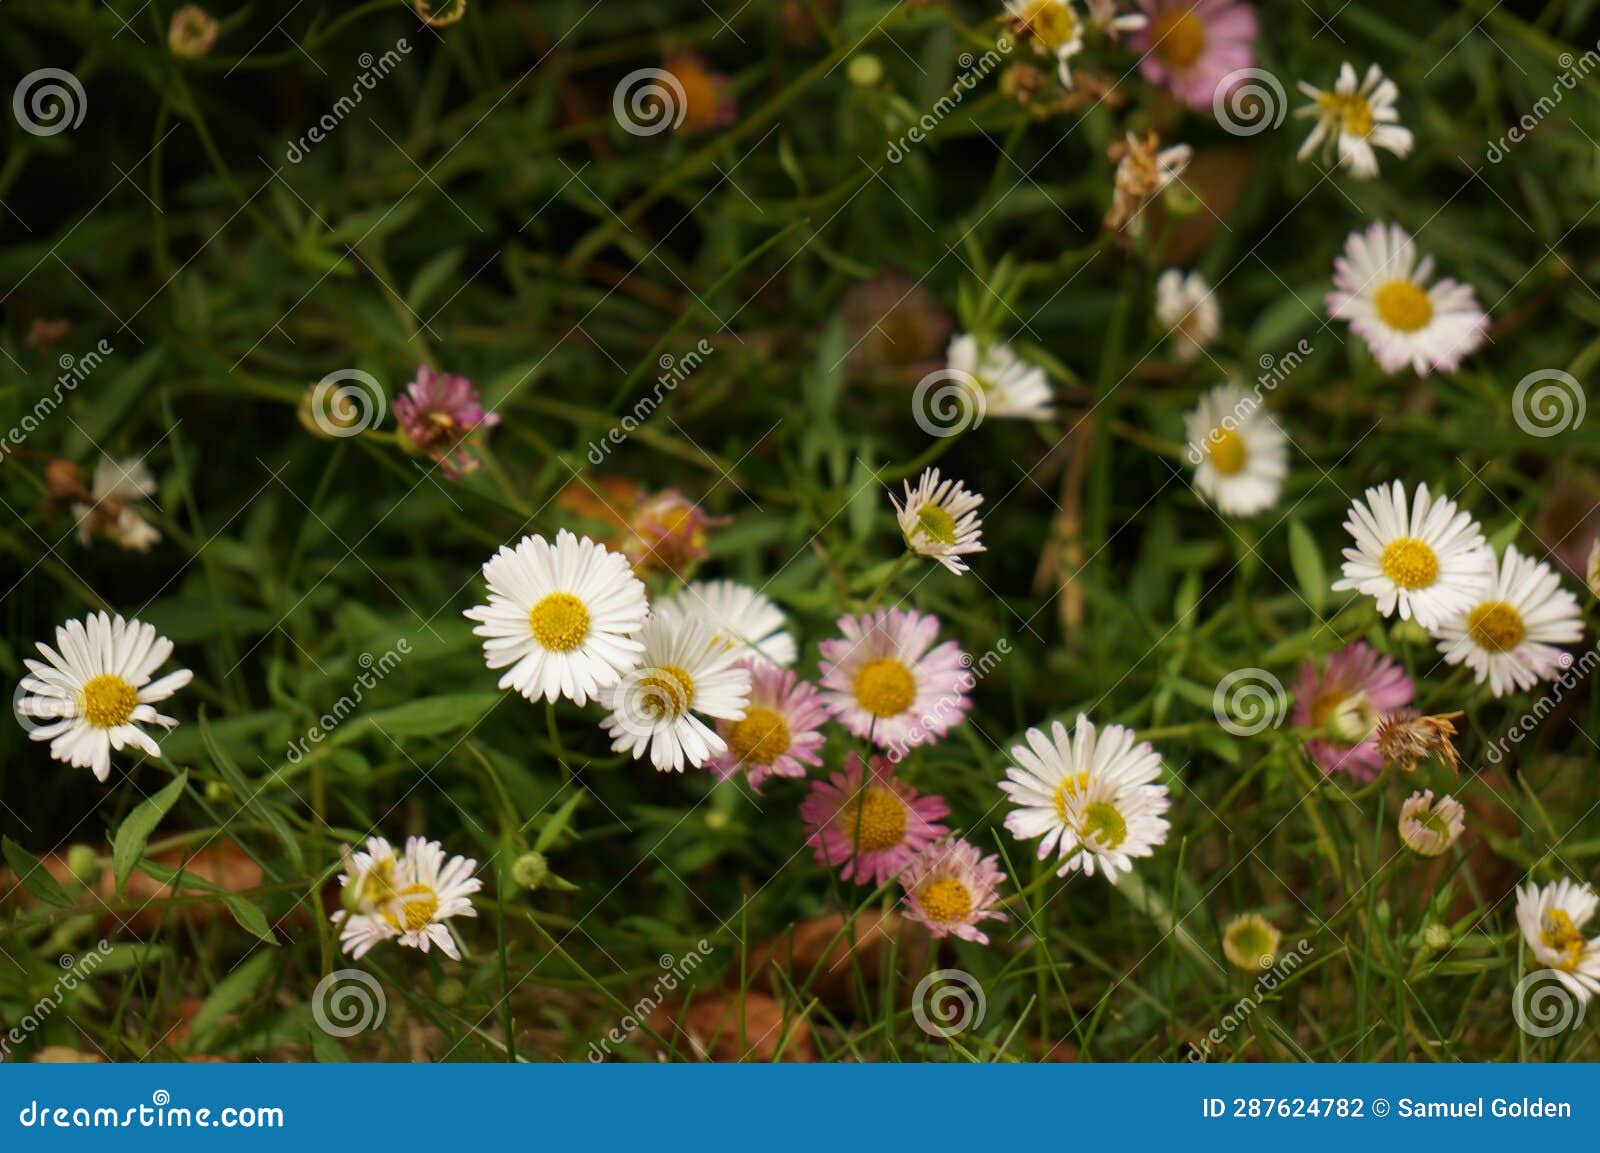 beautiful group of pink and white dandelions